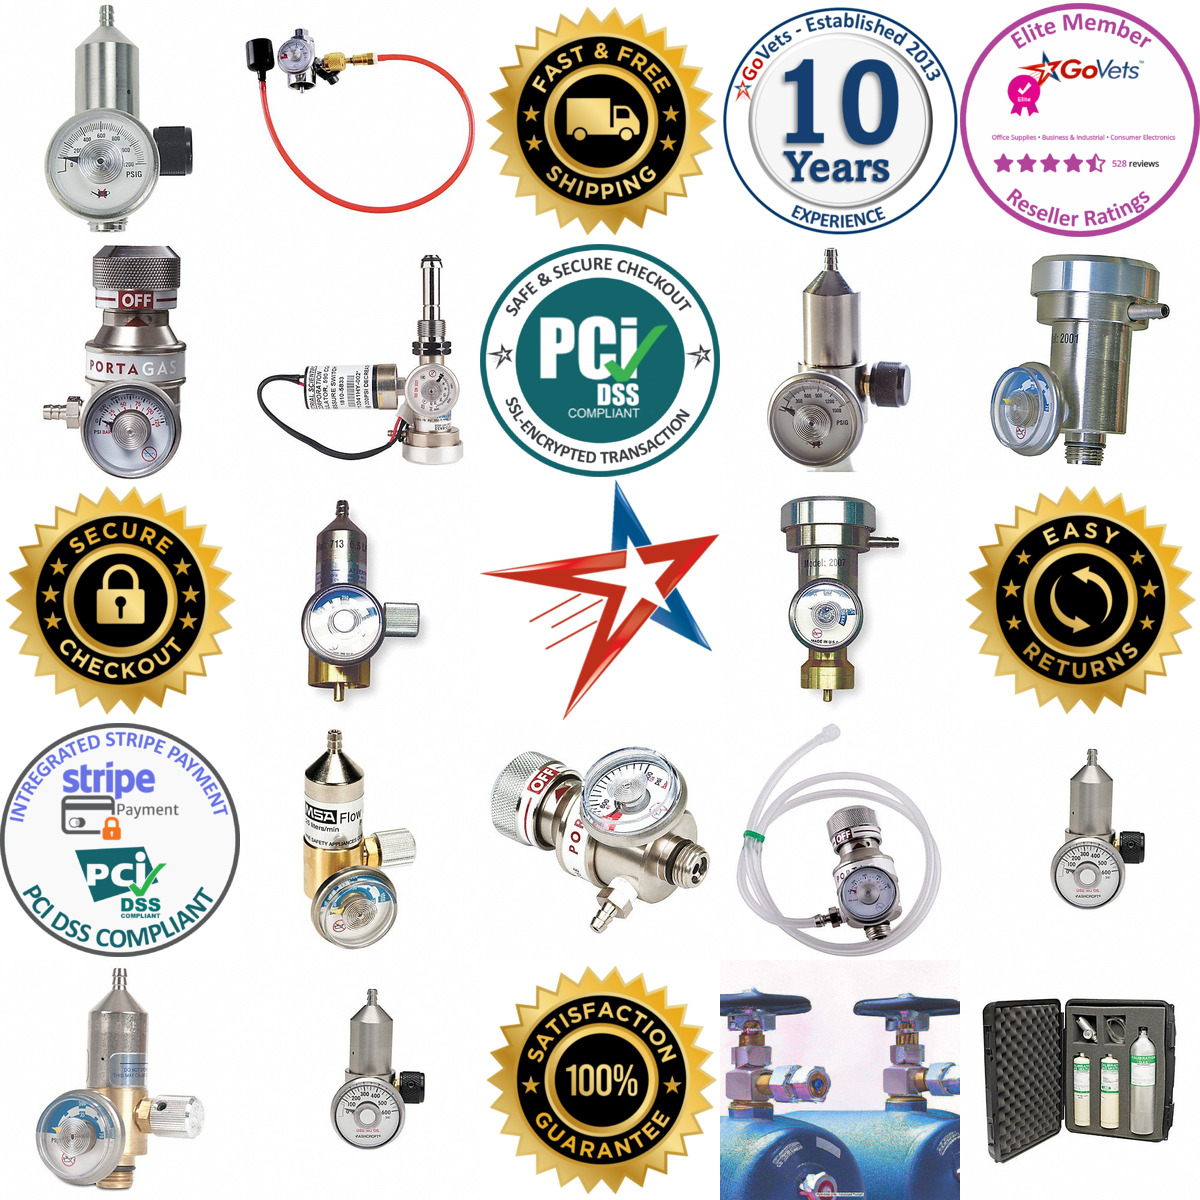 A selection of Gas Cylinder Regulators products on GoVets